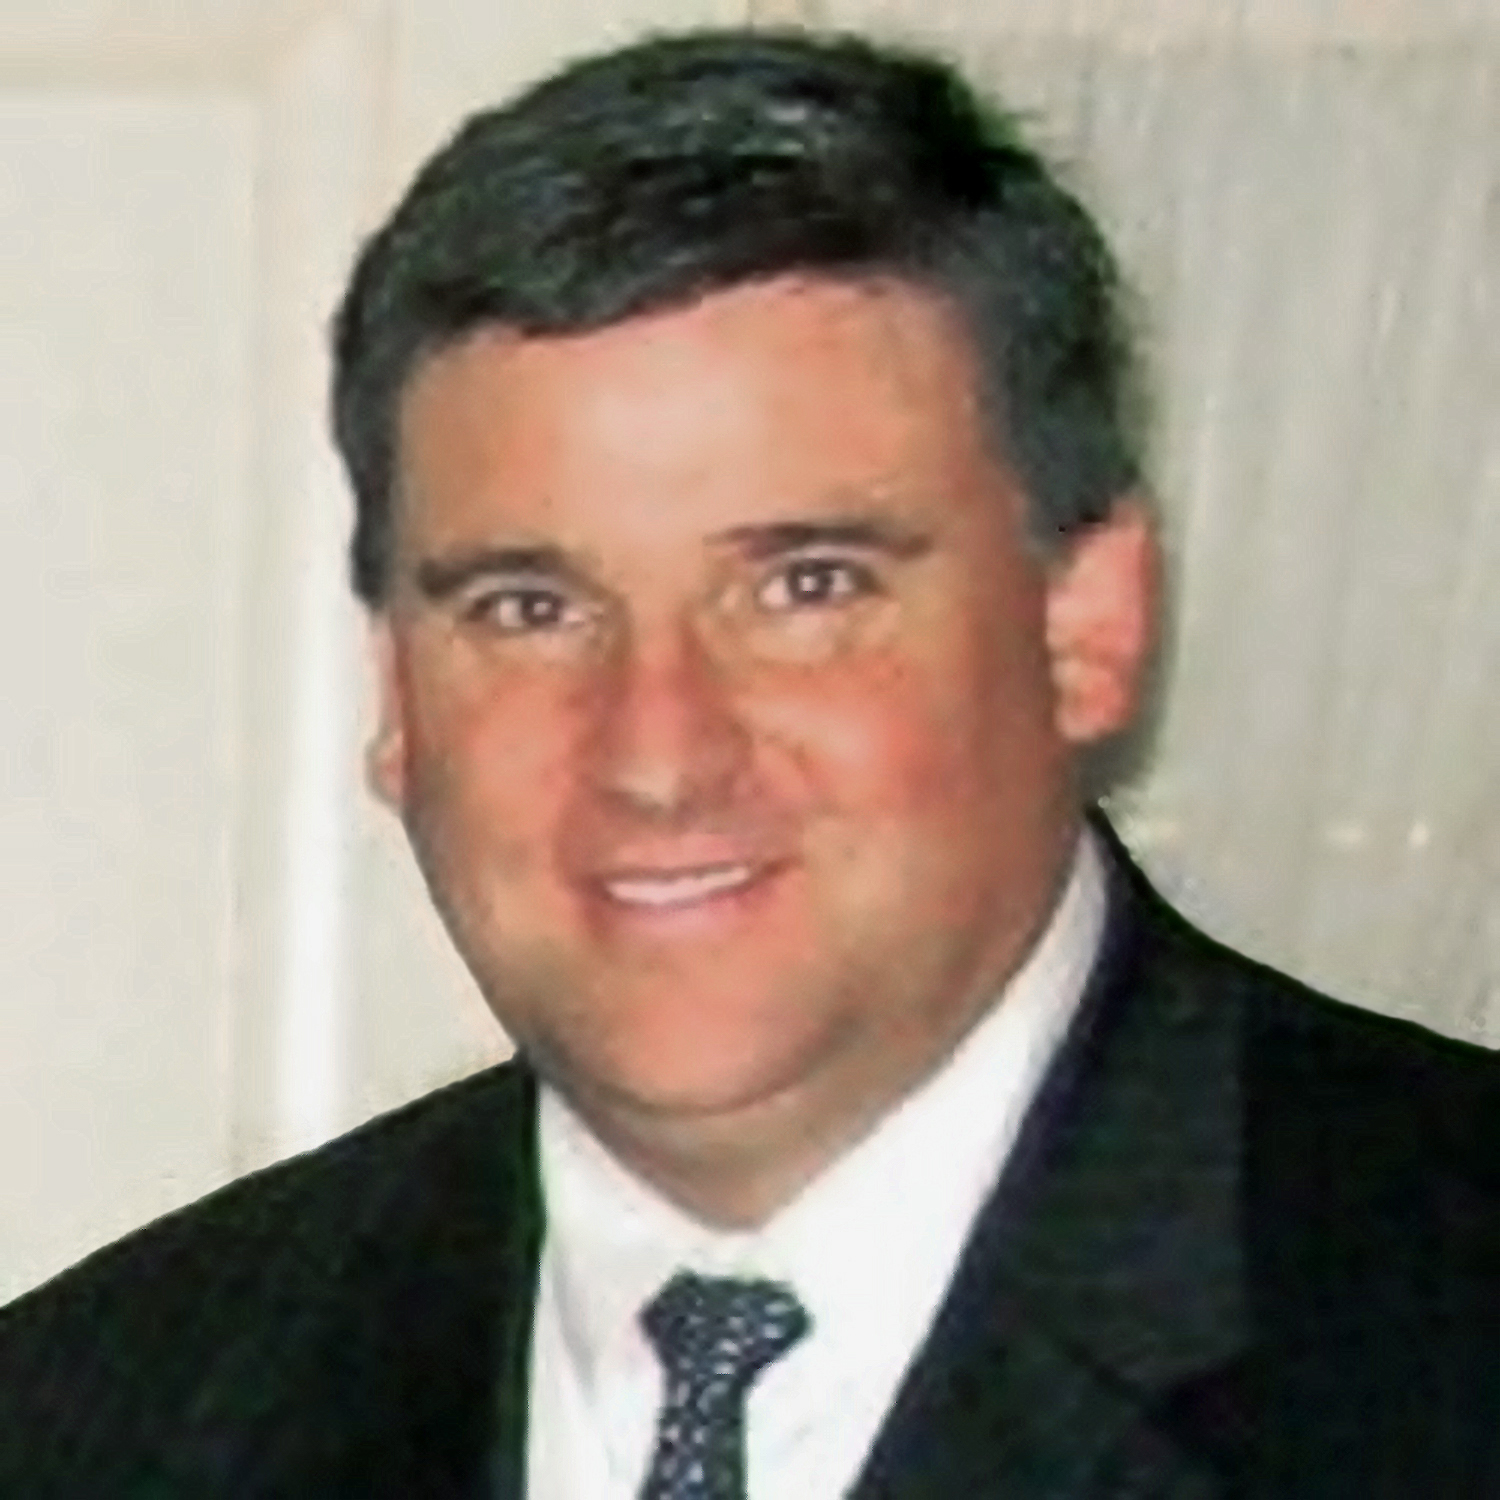 Charles P. Collins, Ed.D., is the executive director of Husson University’s Southern Maine campus.